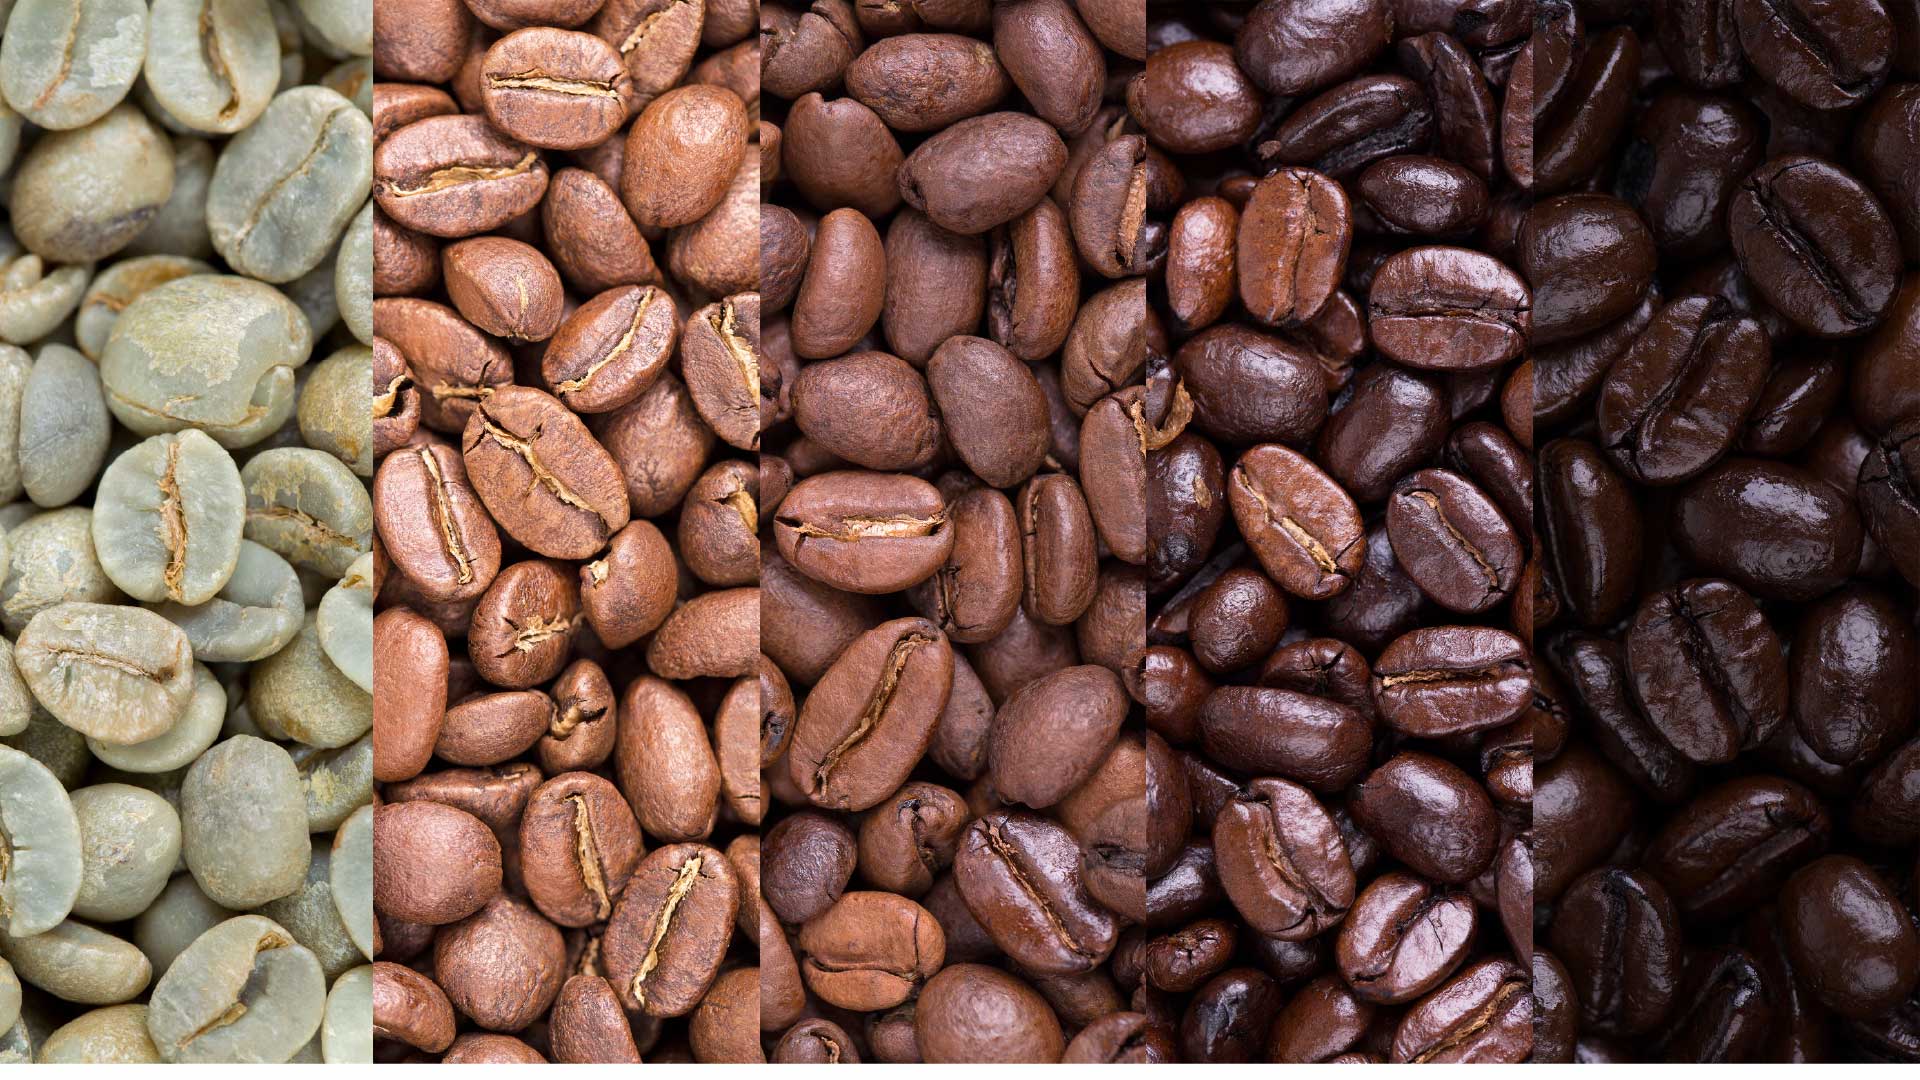 Different levels of Coffee beans roasting to determine coffee acidity.